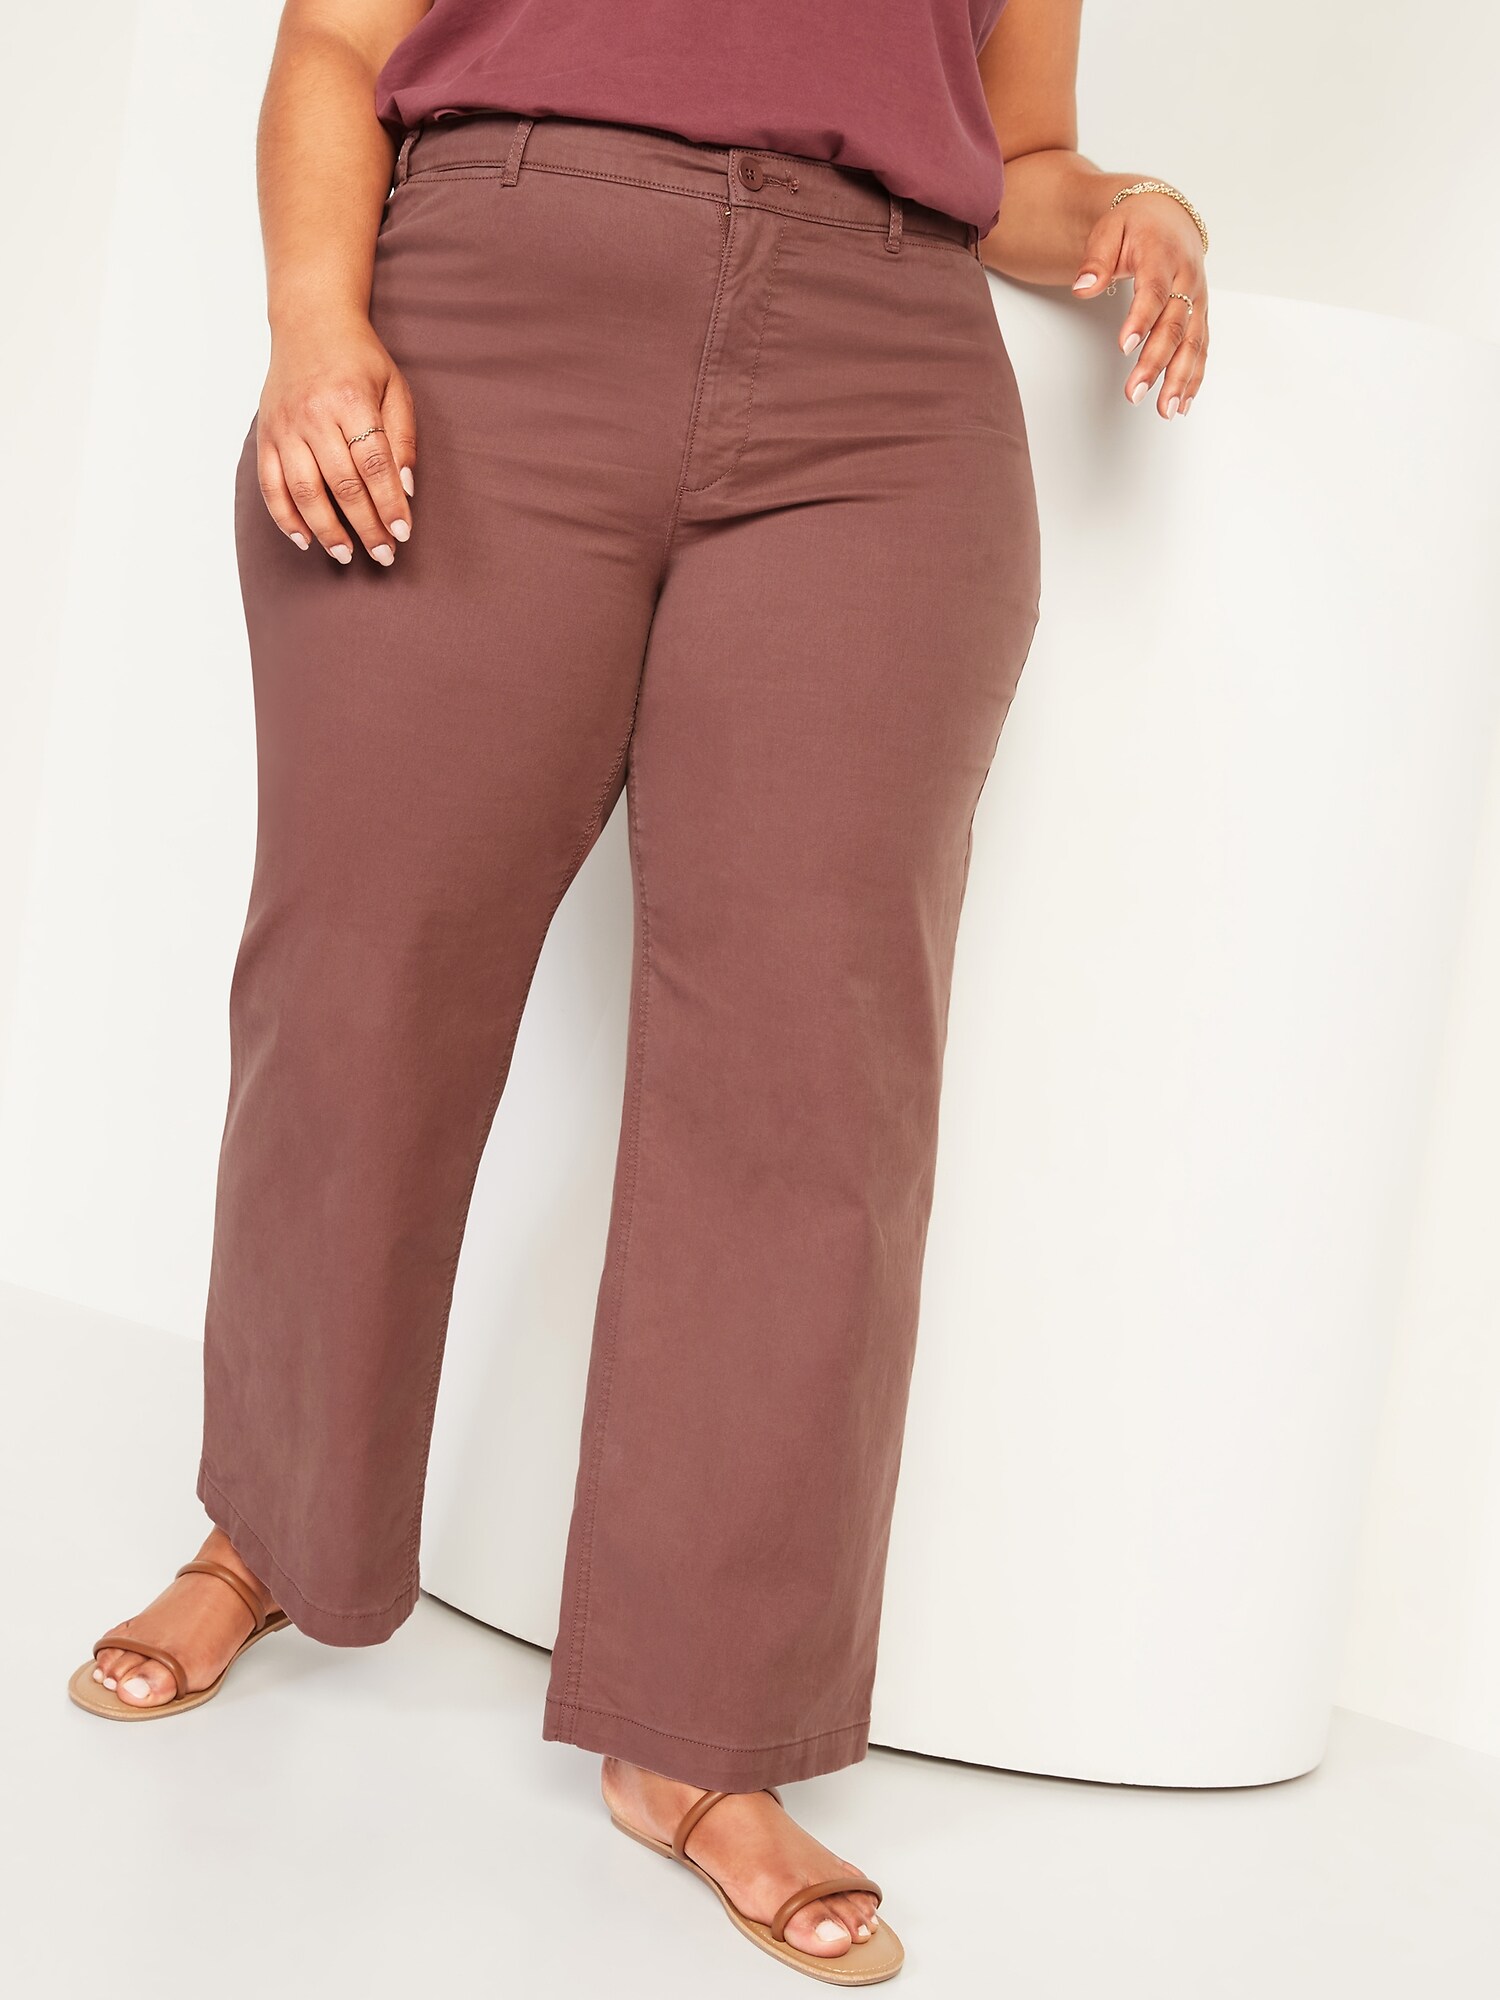 Extra High-Waisted Wide-Leg Pants for Women